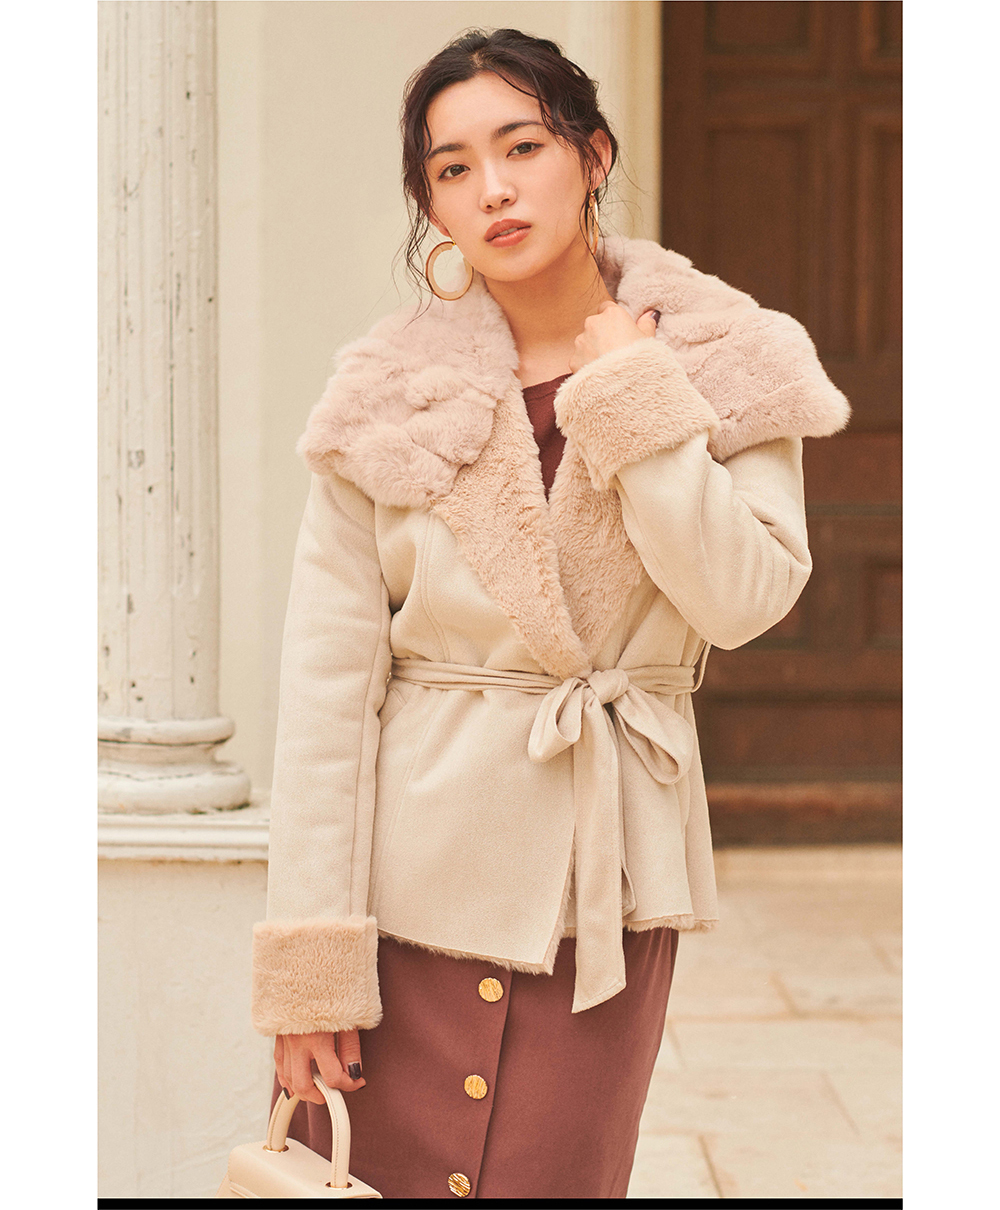 2020 OUTER COLLECTION TRY CUTE - 山口乃々華コラボ Vol.2